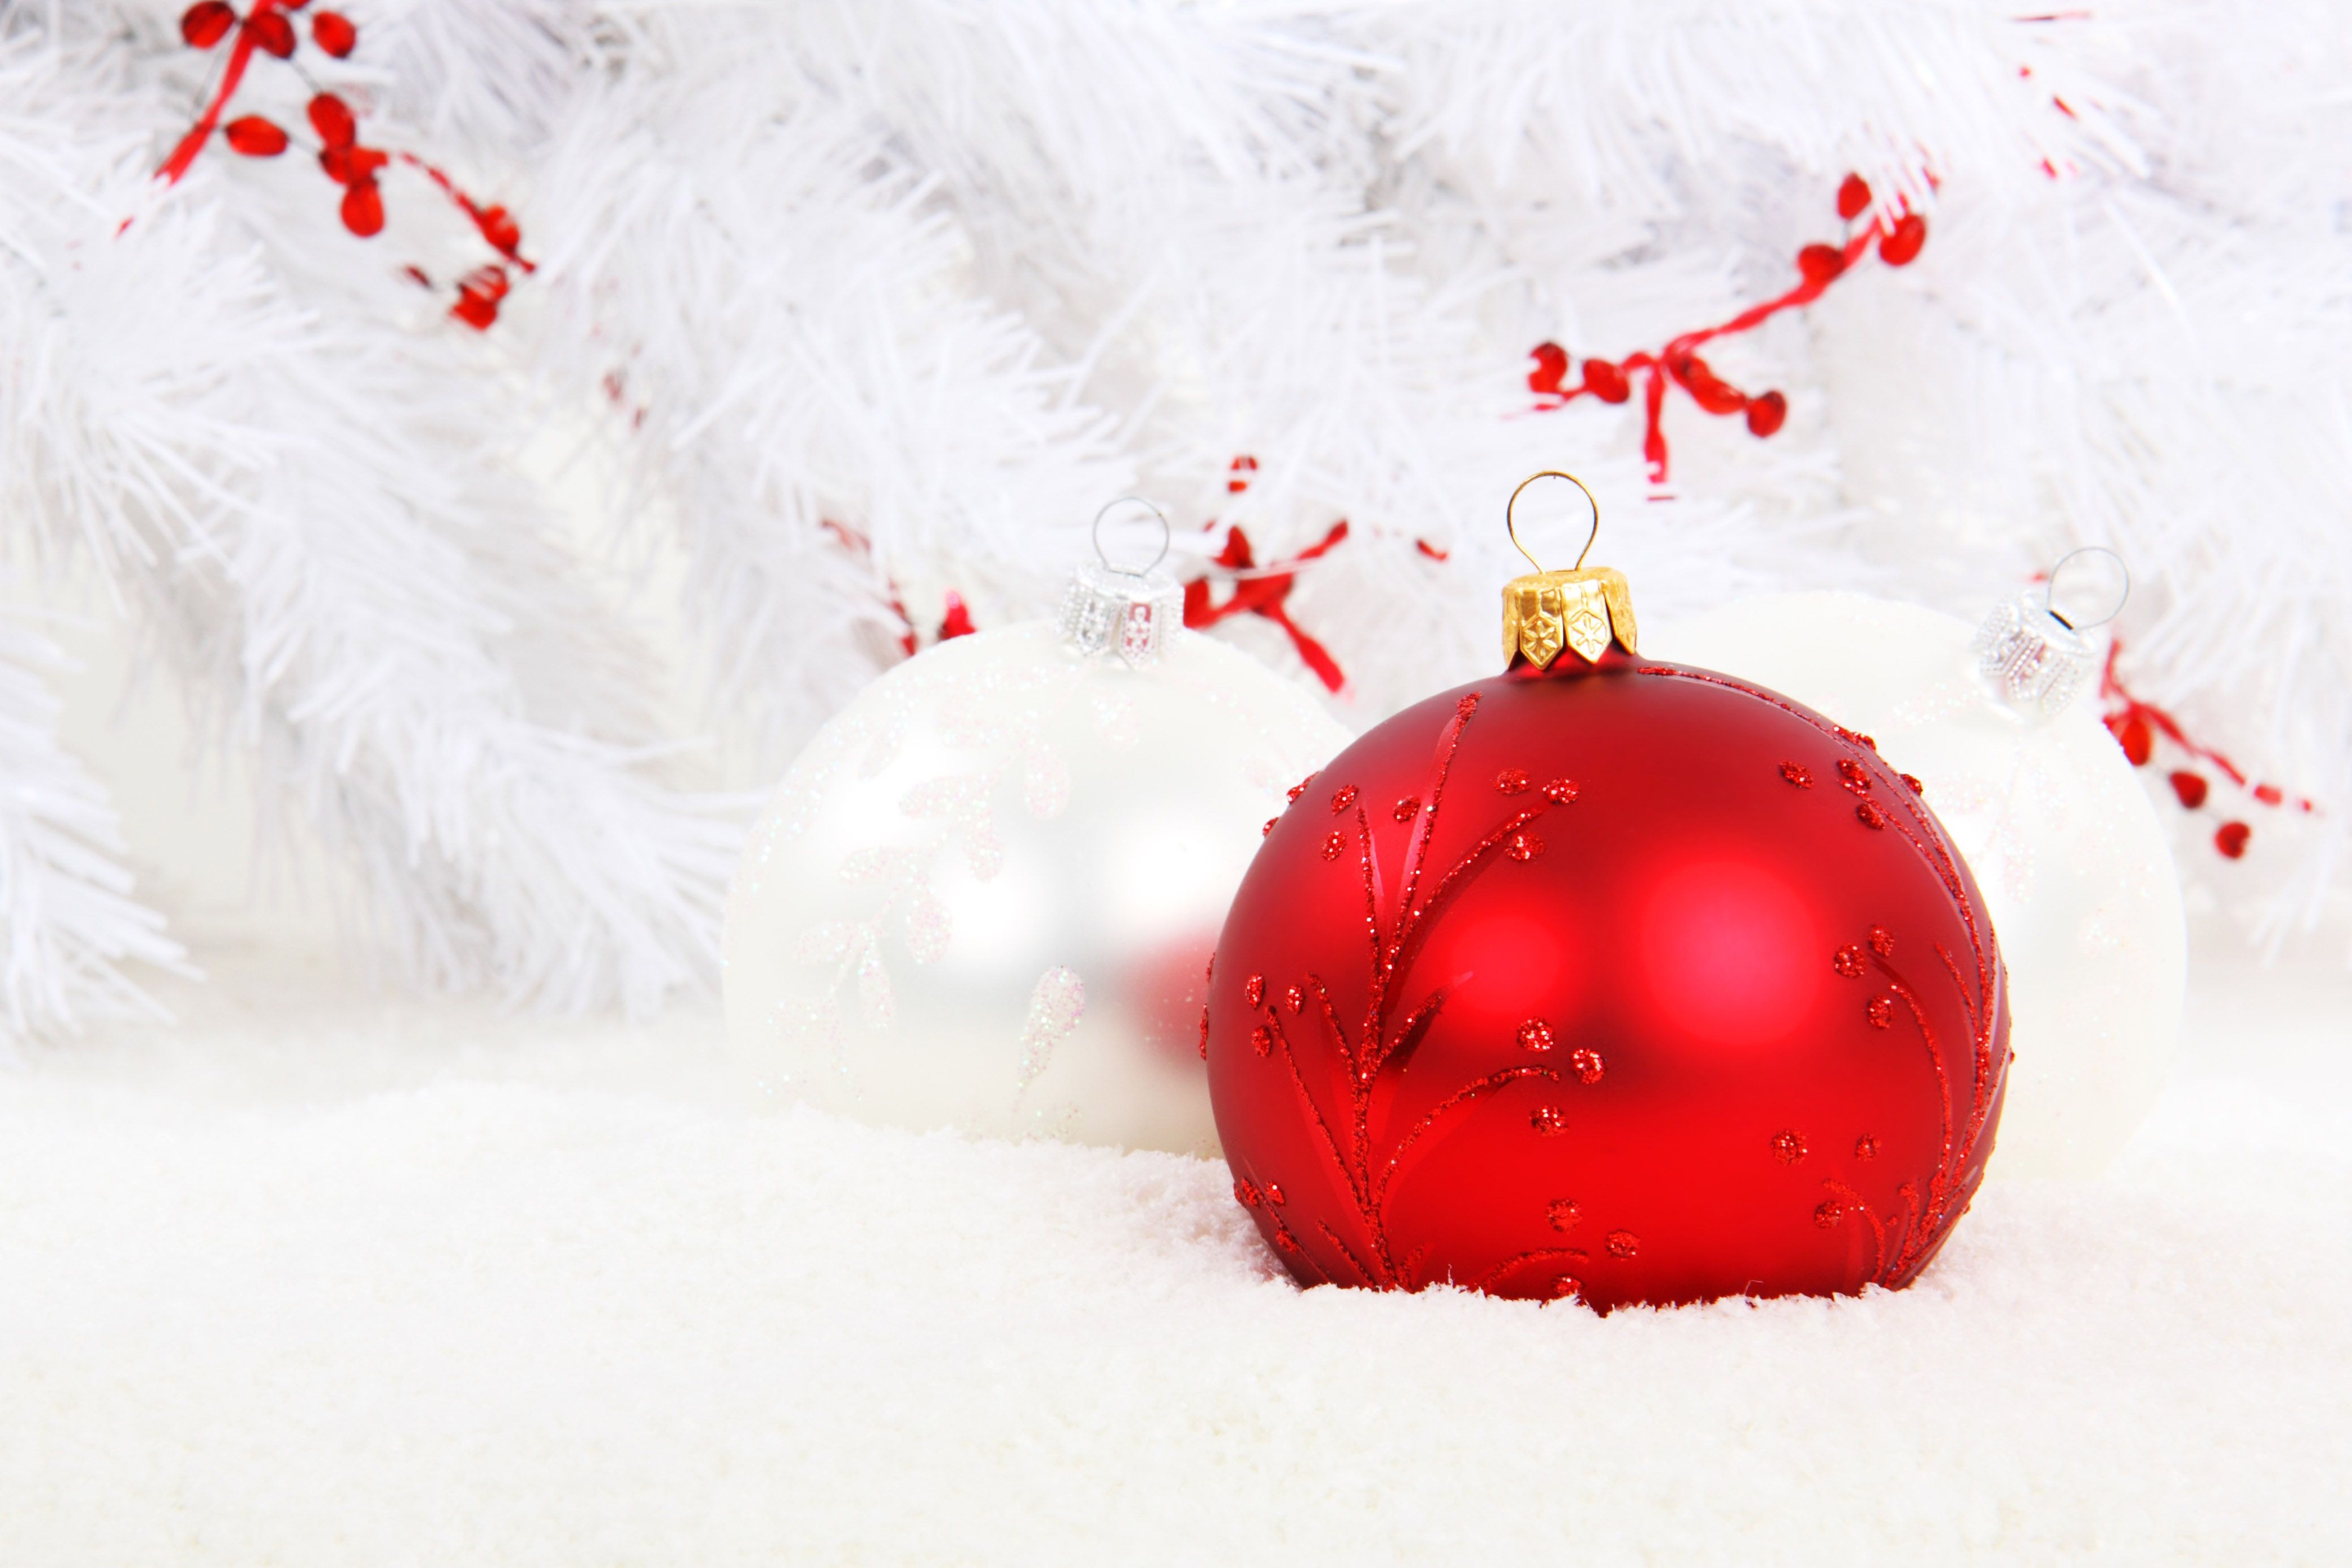 20 More Ball Decoration for a Free Christmas Wallpapers and Christmas Backgrounds Image